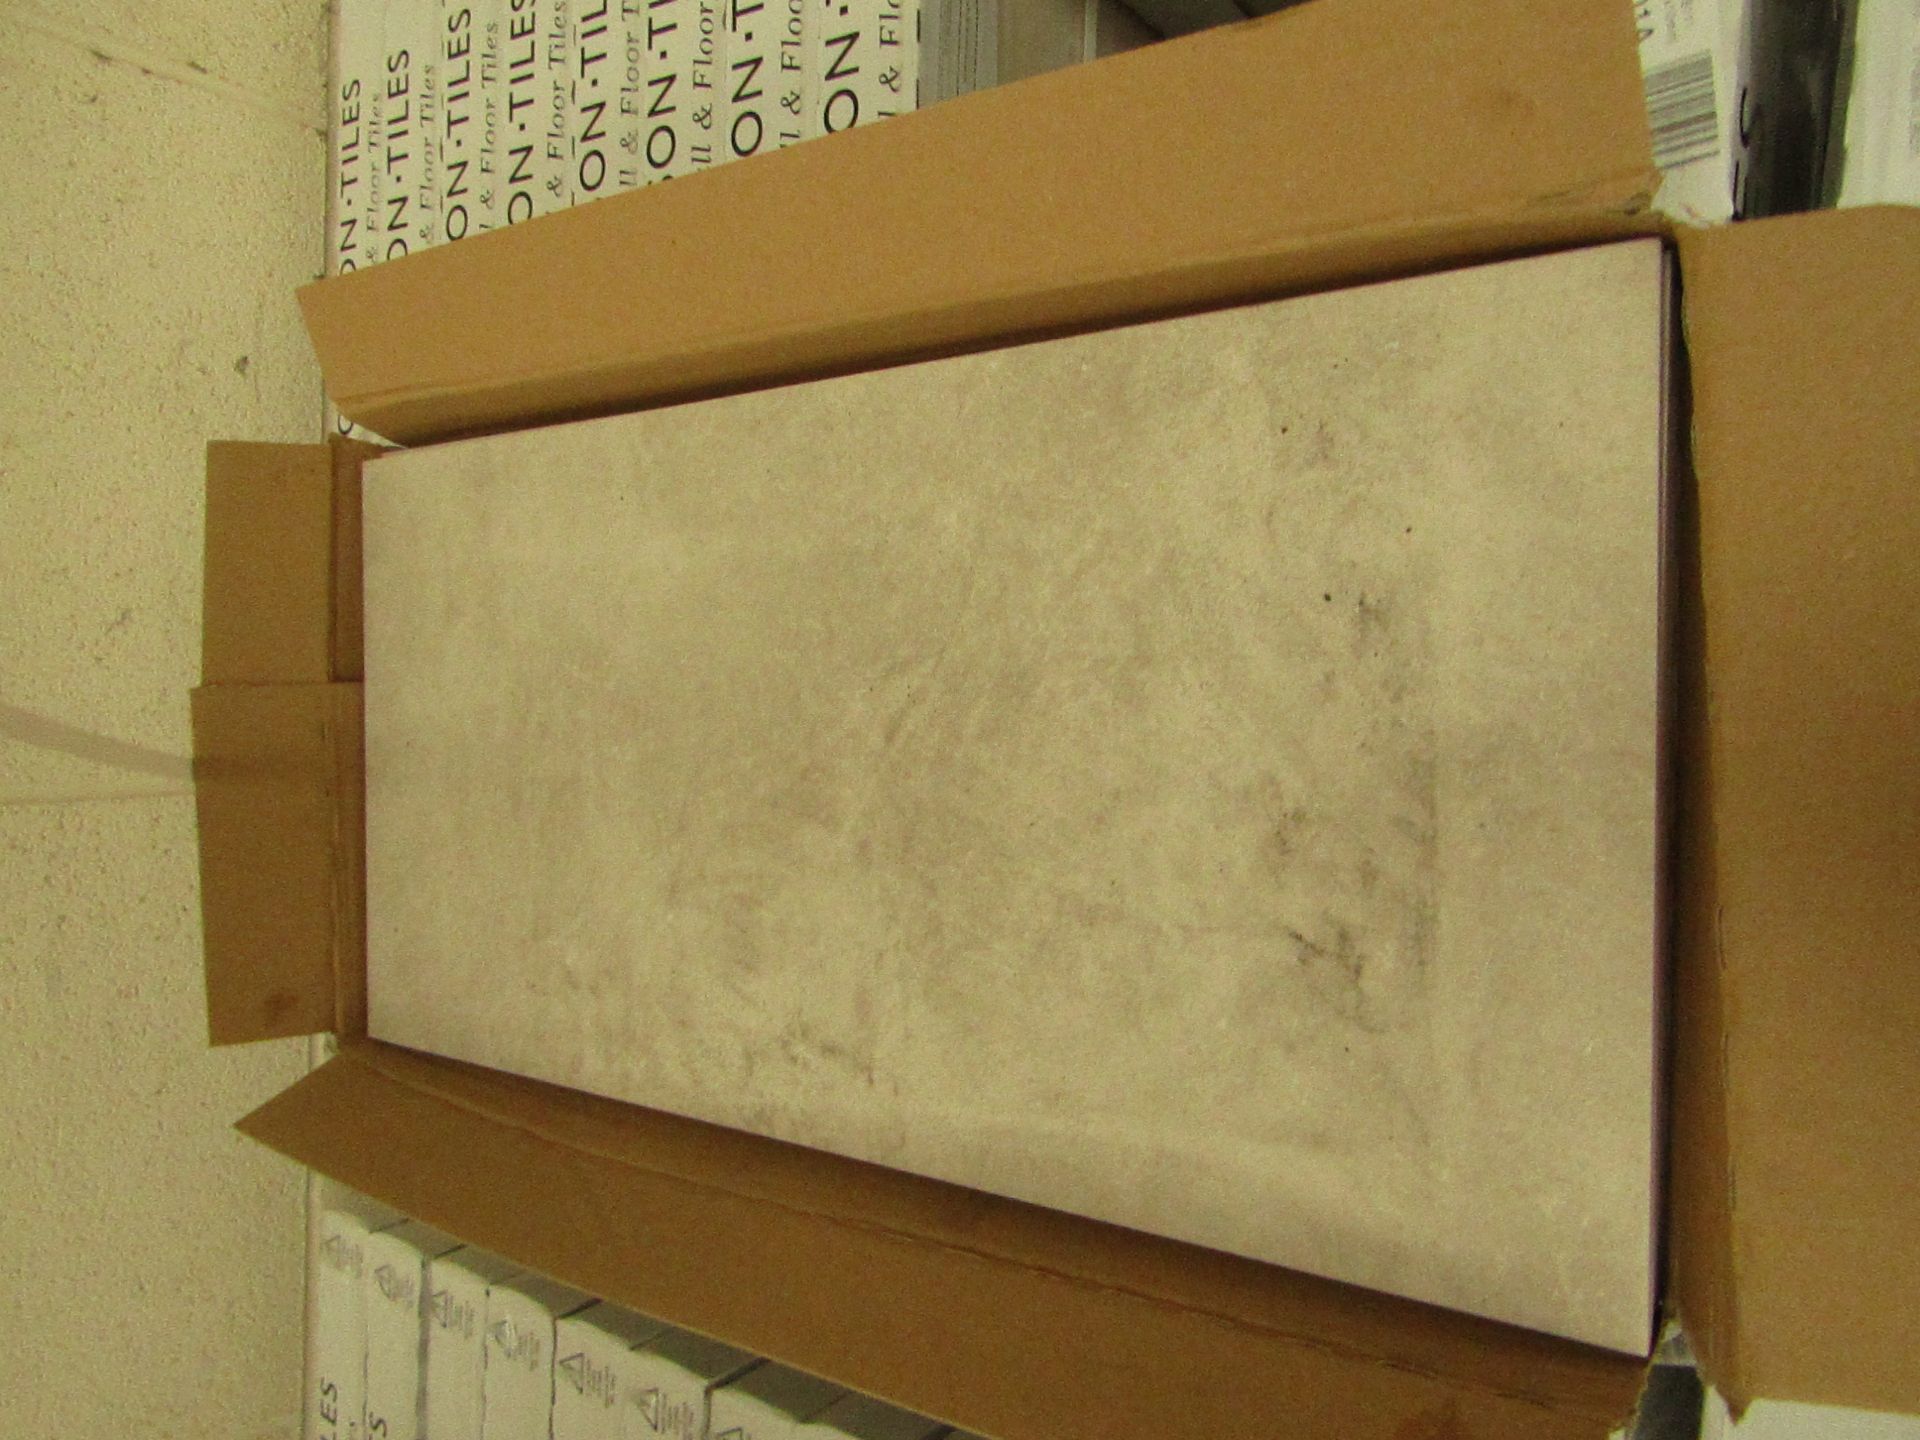 10x Packs of 5 Cambridge Old stone Textured 300x600 wall and floor tiles by Johnsons, new. The RRP